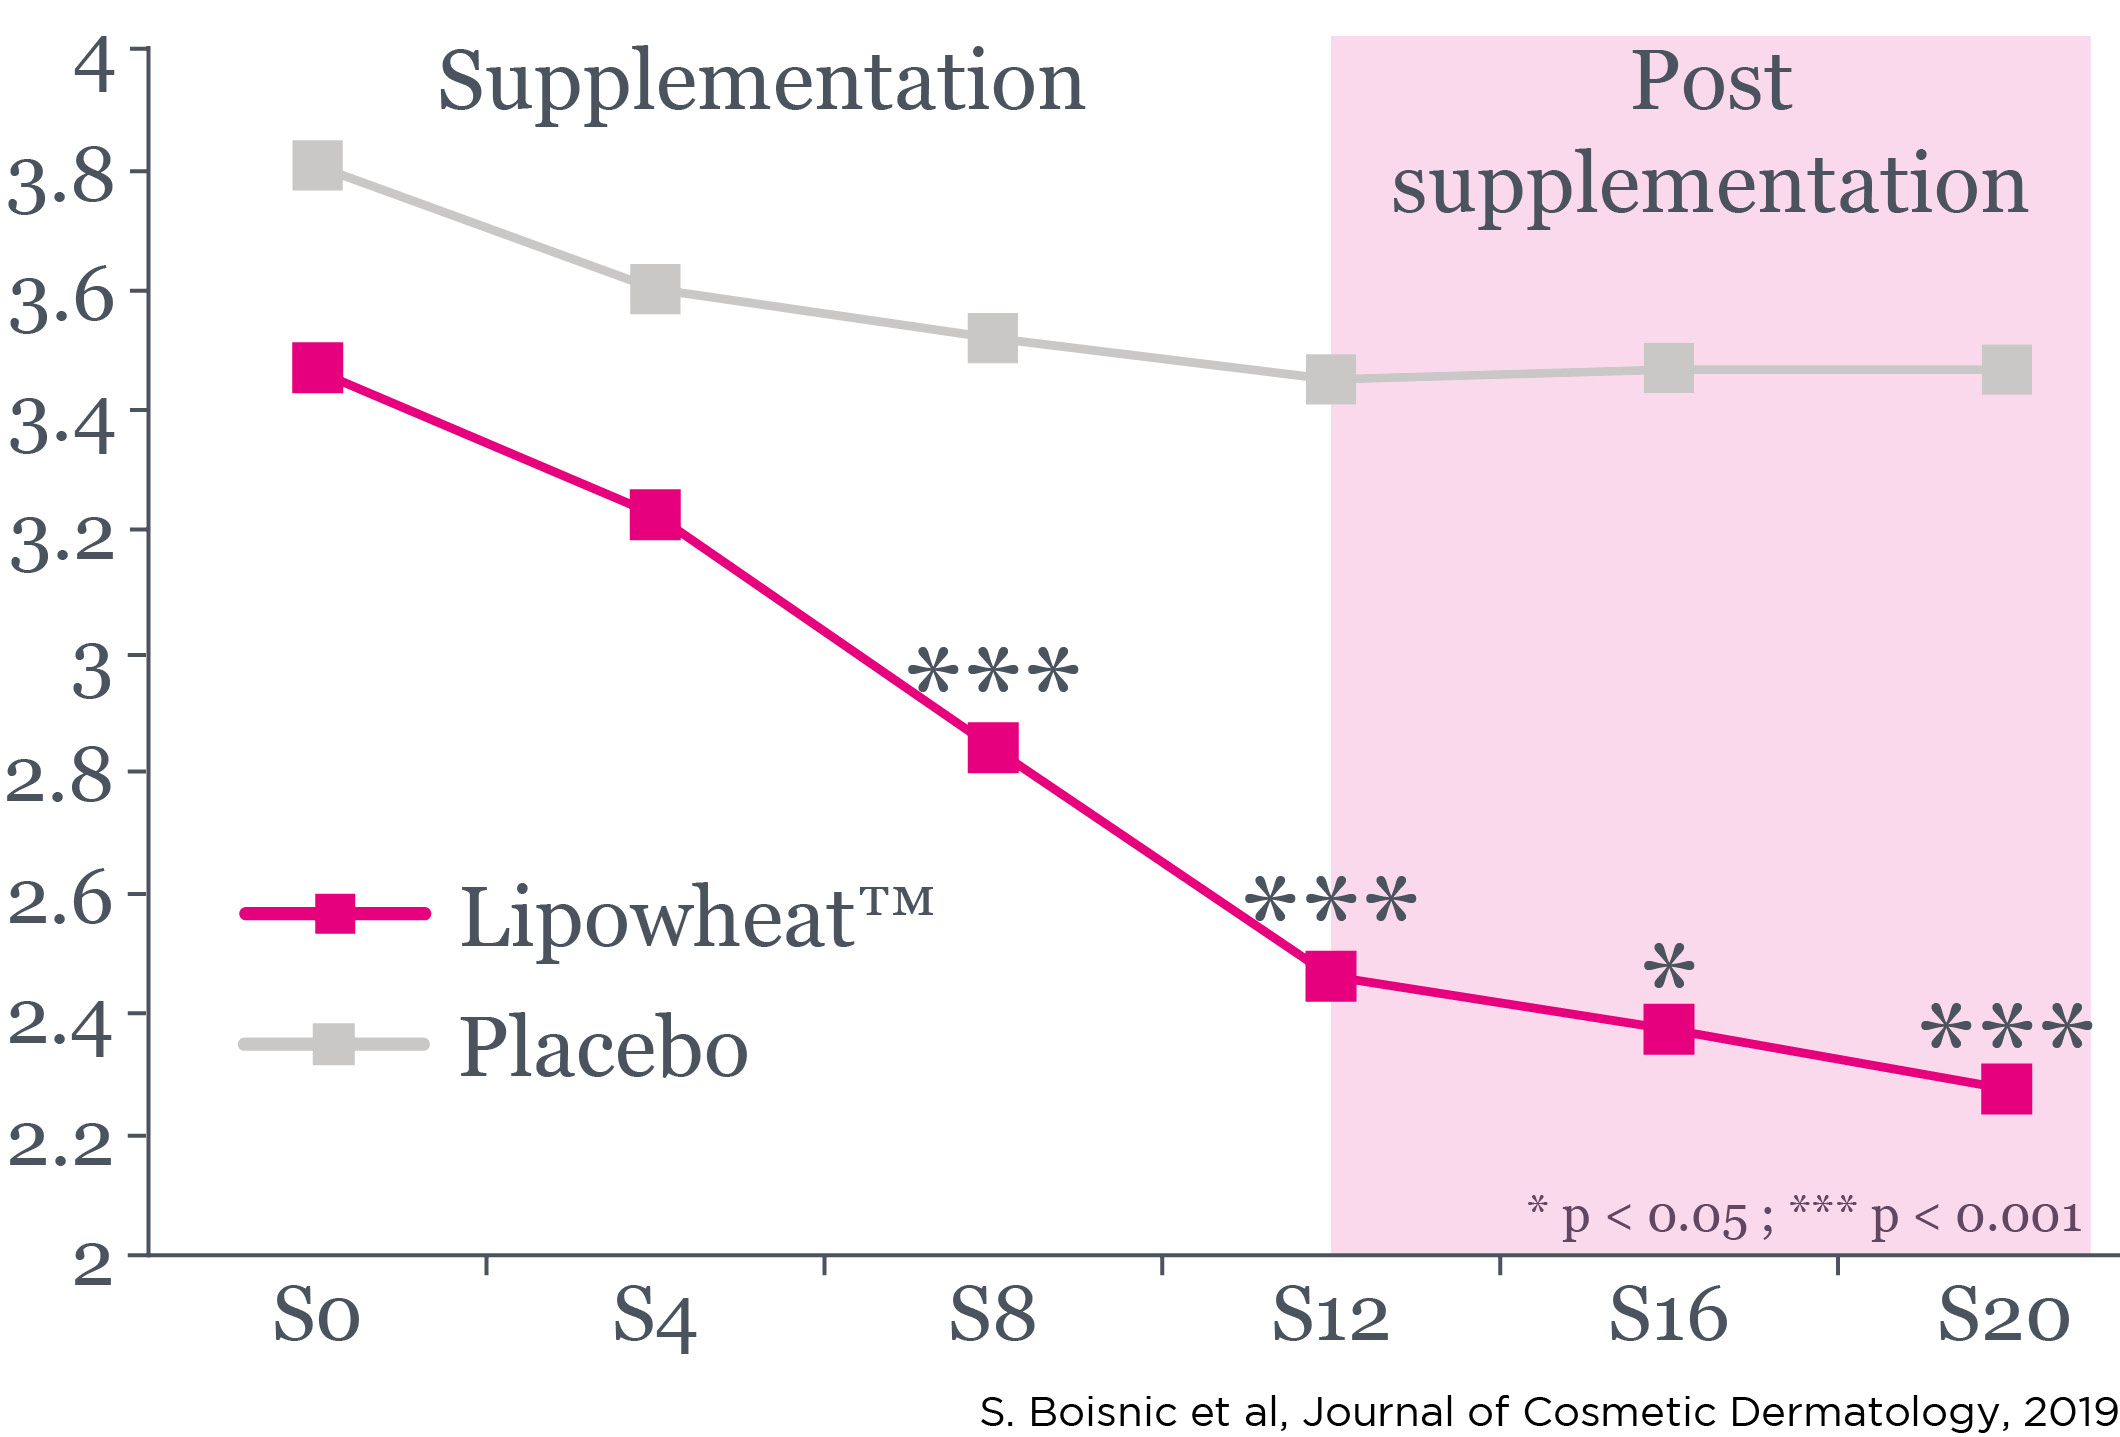 White and pink graphic - post supplementation - Lipowheat™